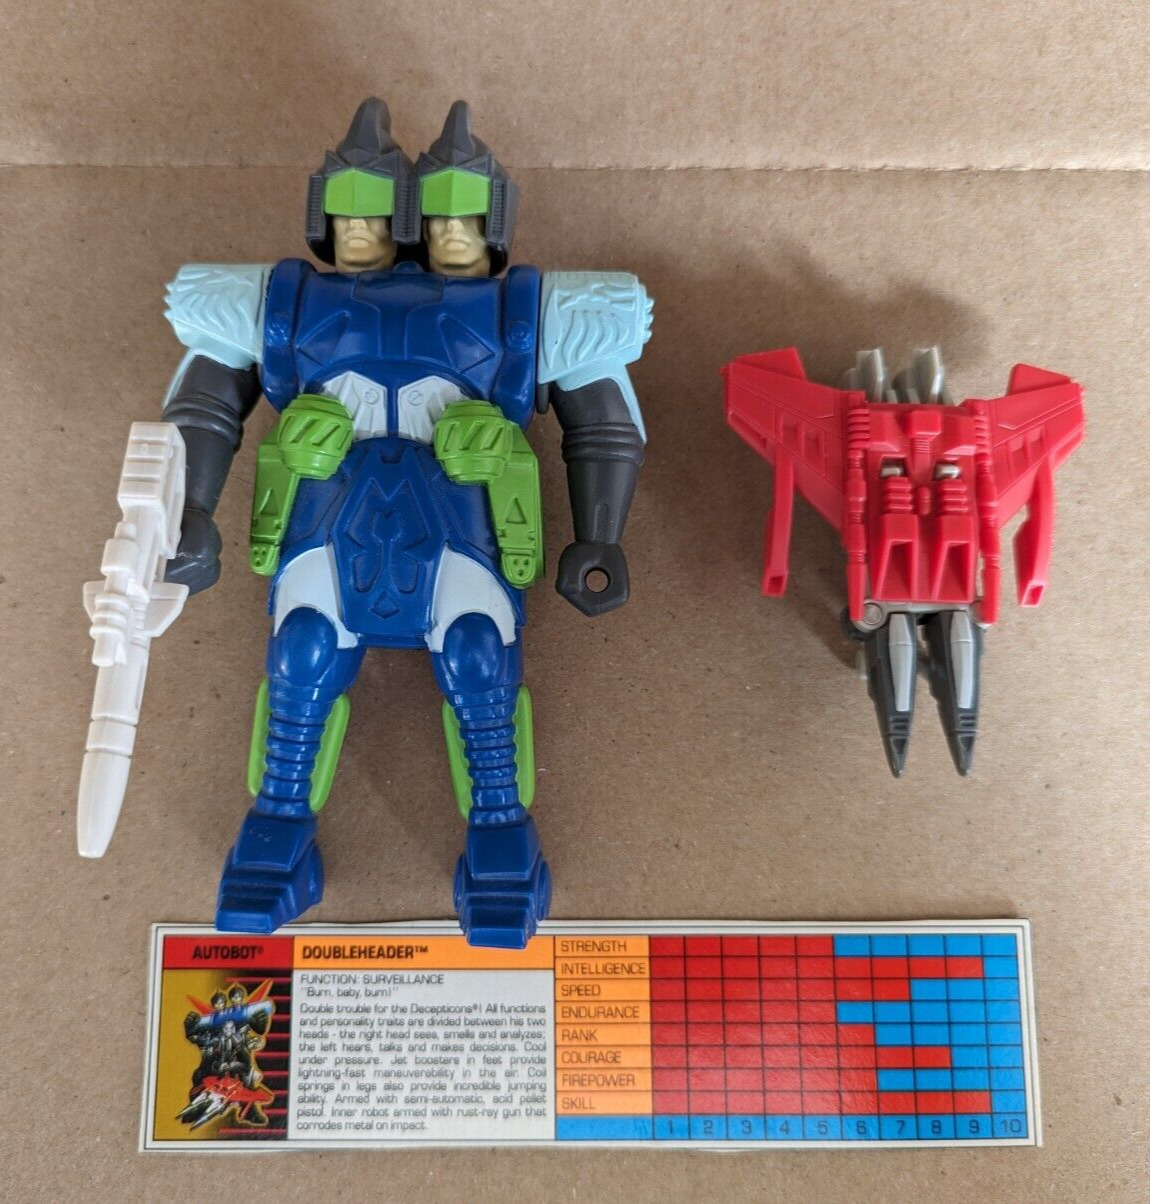 Vintage 1988 Transformers G1 Pretenders DOUBLEHEADER ALMOST COMPLETE with specs